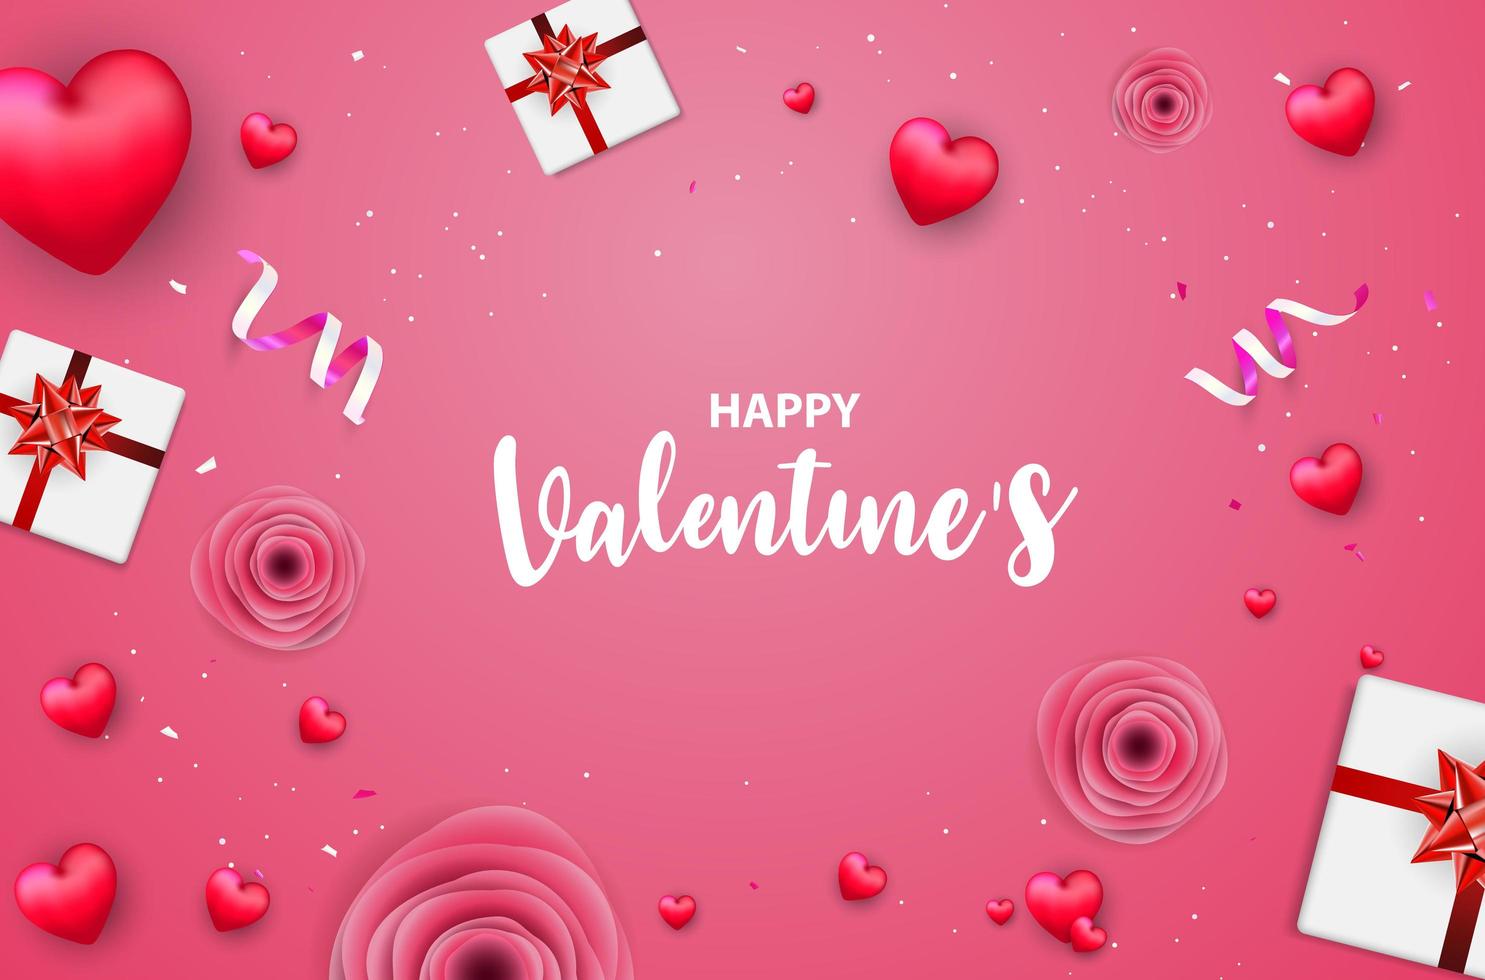 Pink Valentine's day banner with red hearts, roses, gift boxes and confetti vector